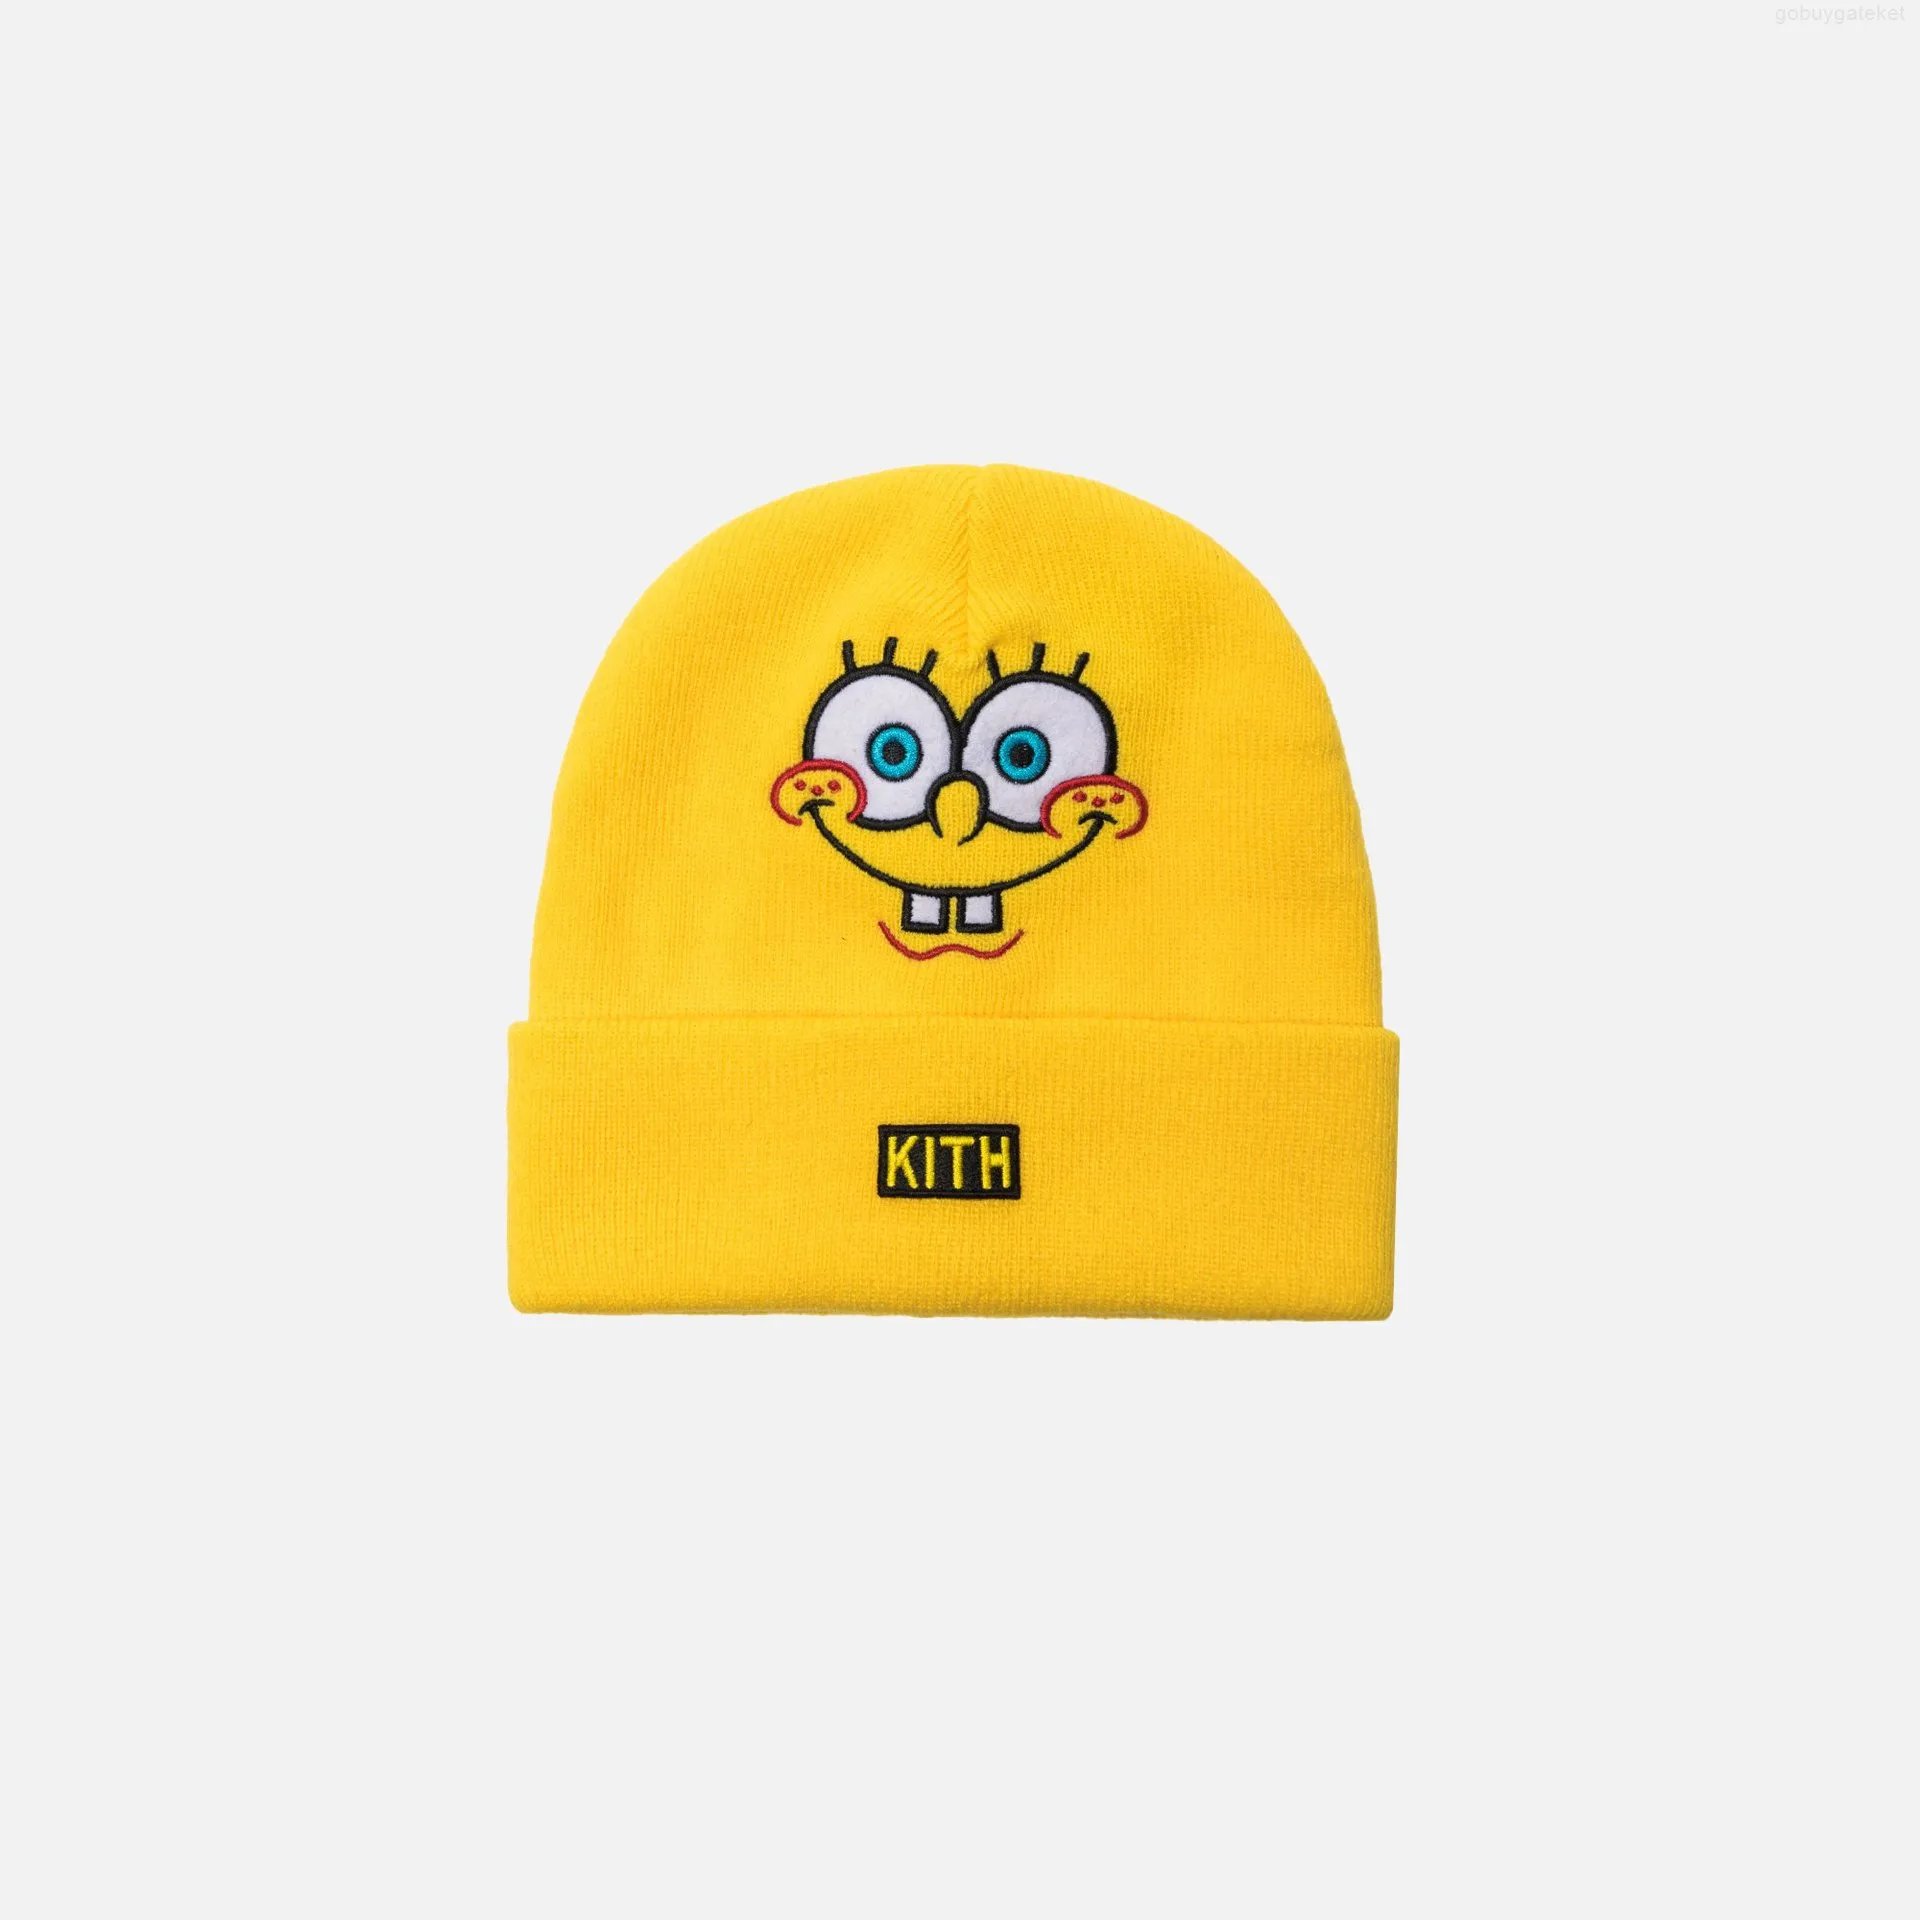 Knitted Hat Kith Winter Women Cute Cartoon Hat Pink Starfish Pattern Embroidery Autumn Winter Outdoor Cold Hat 17UTE{category}